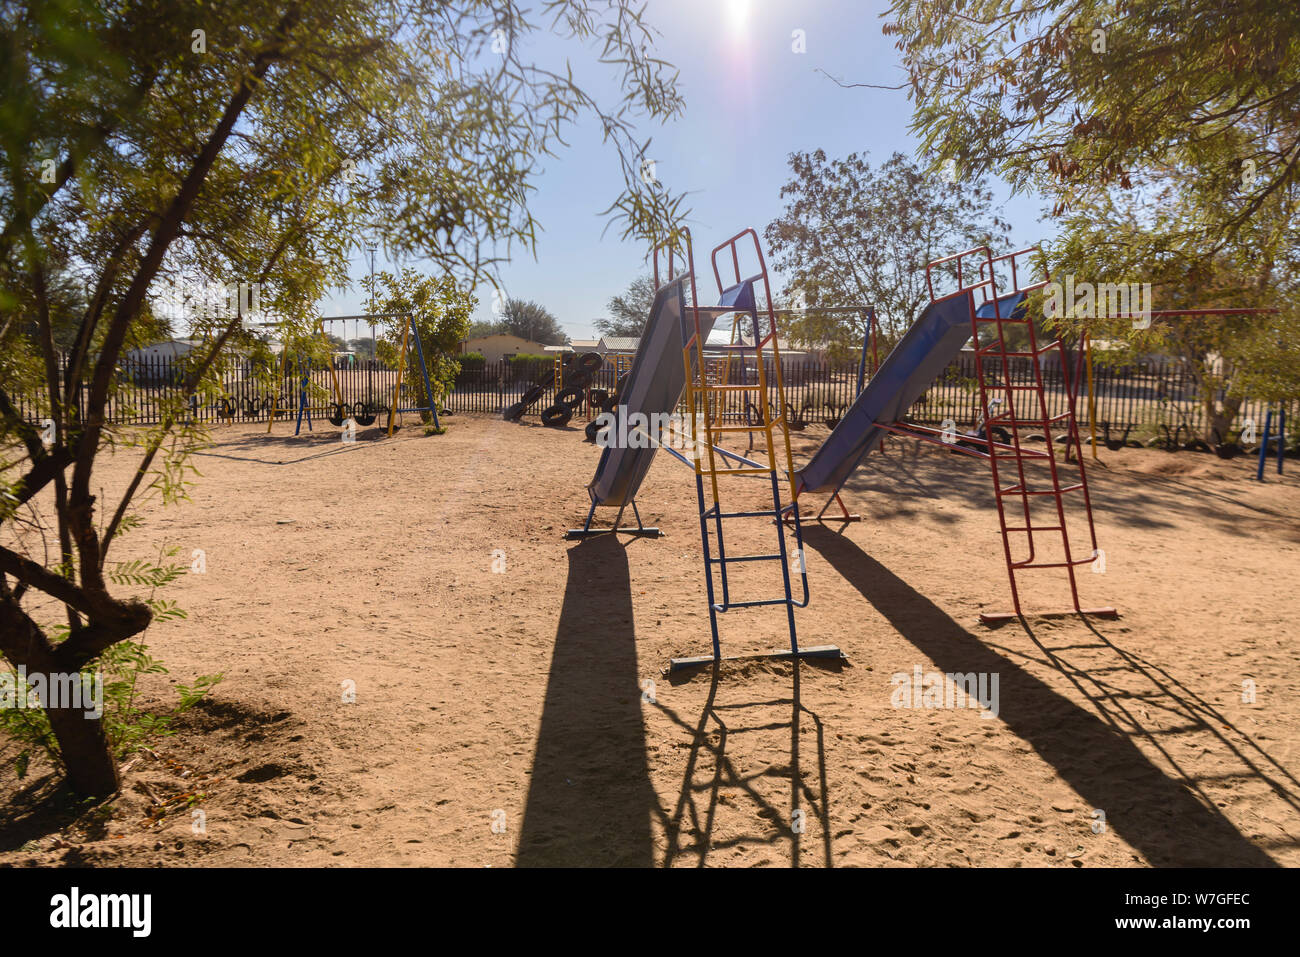 Slides, swings and climbing frames in an African village, Namibia Stock Photo